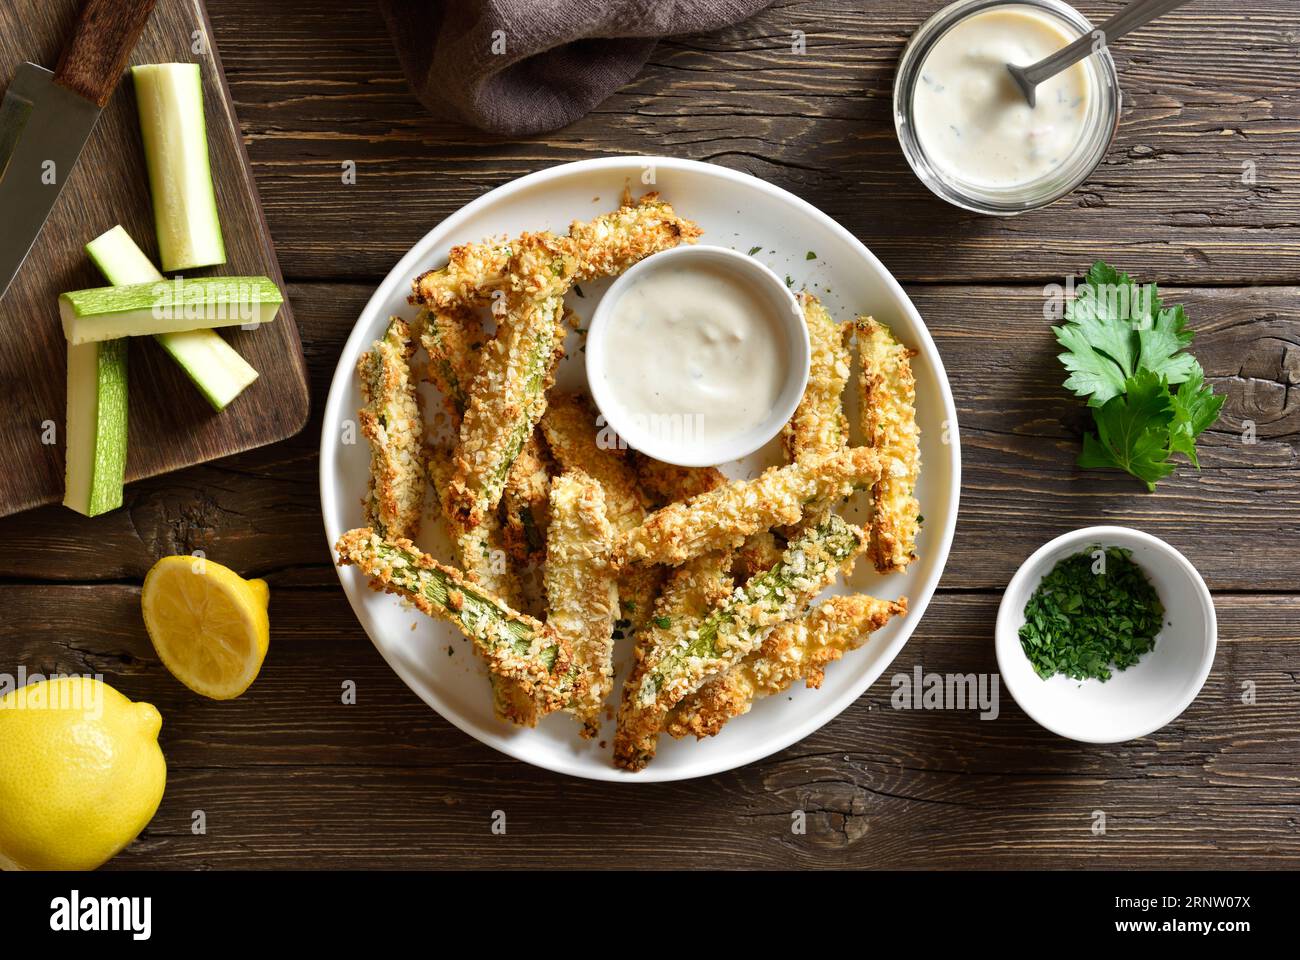 Crunchy zucchini breaded sticks with dipping sauce on plate over wooden background. Top view, flat lay Stock Photo